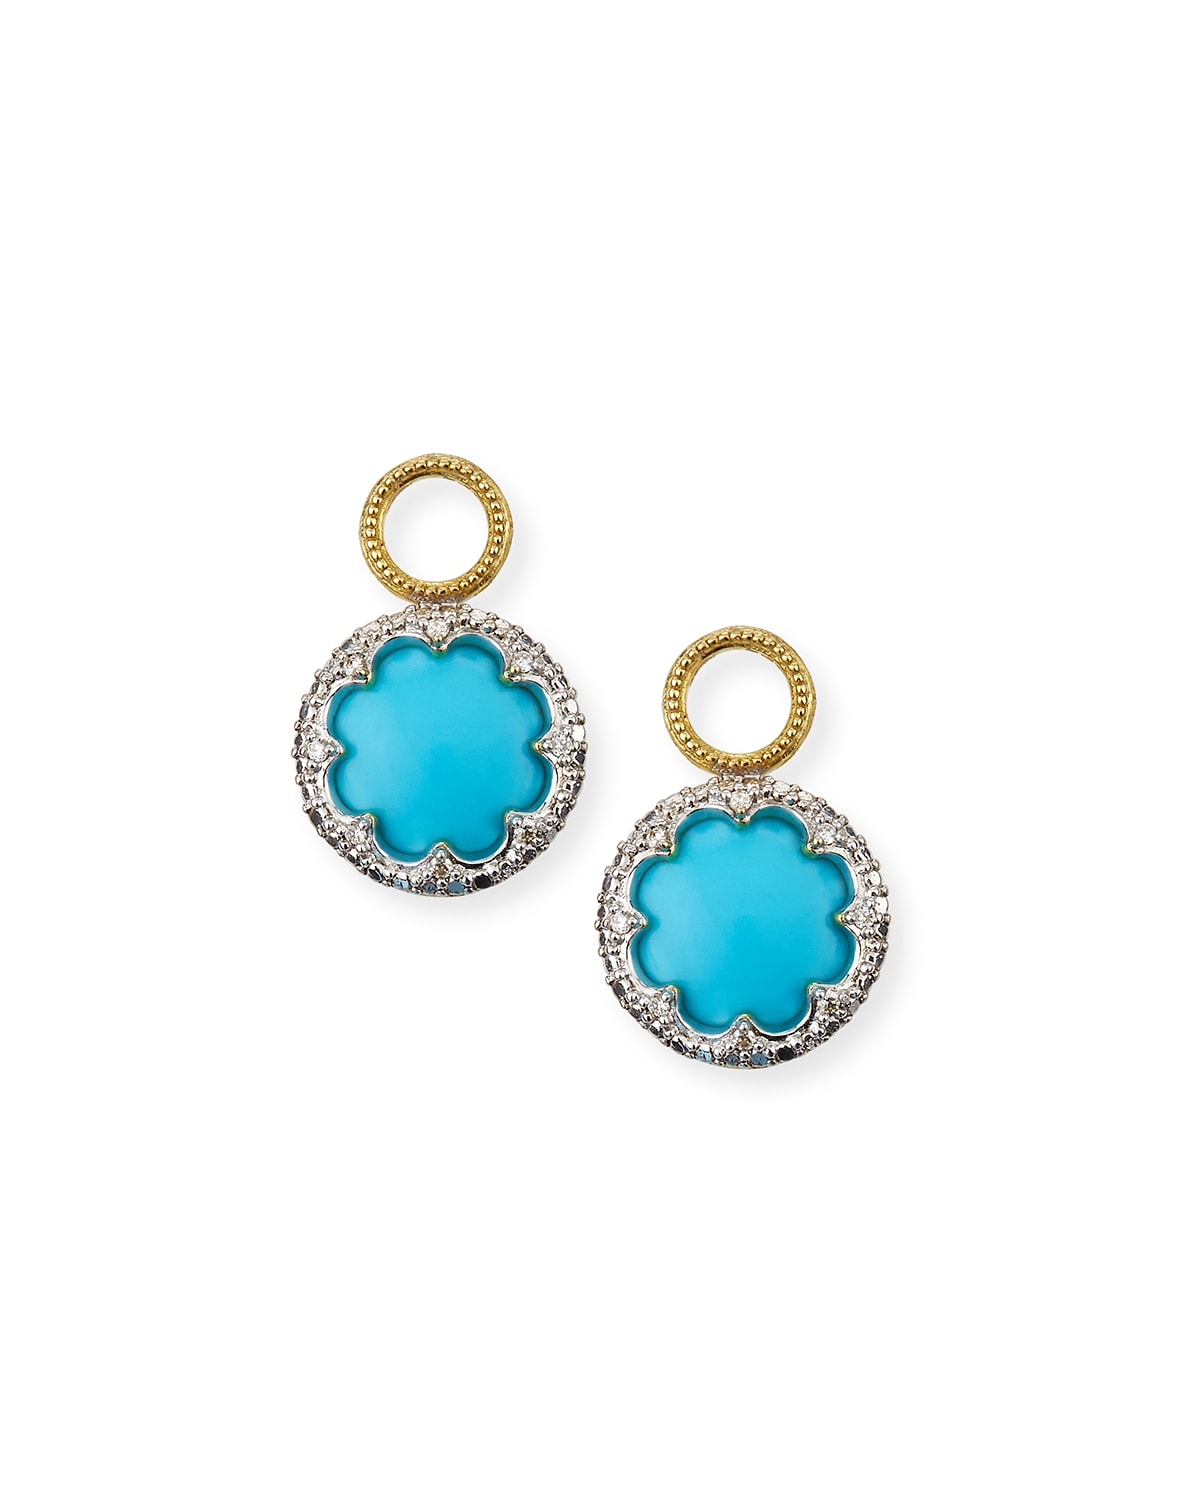 Jude Frances Provence 18k Round Earring Charms W/ Pave, Turquoise